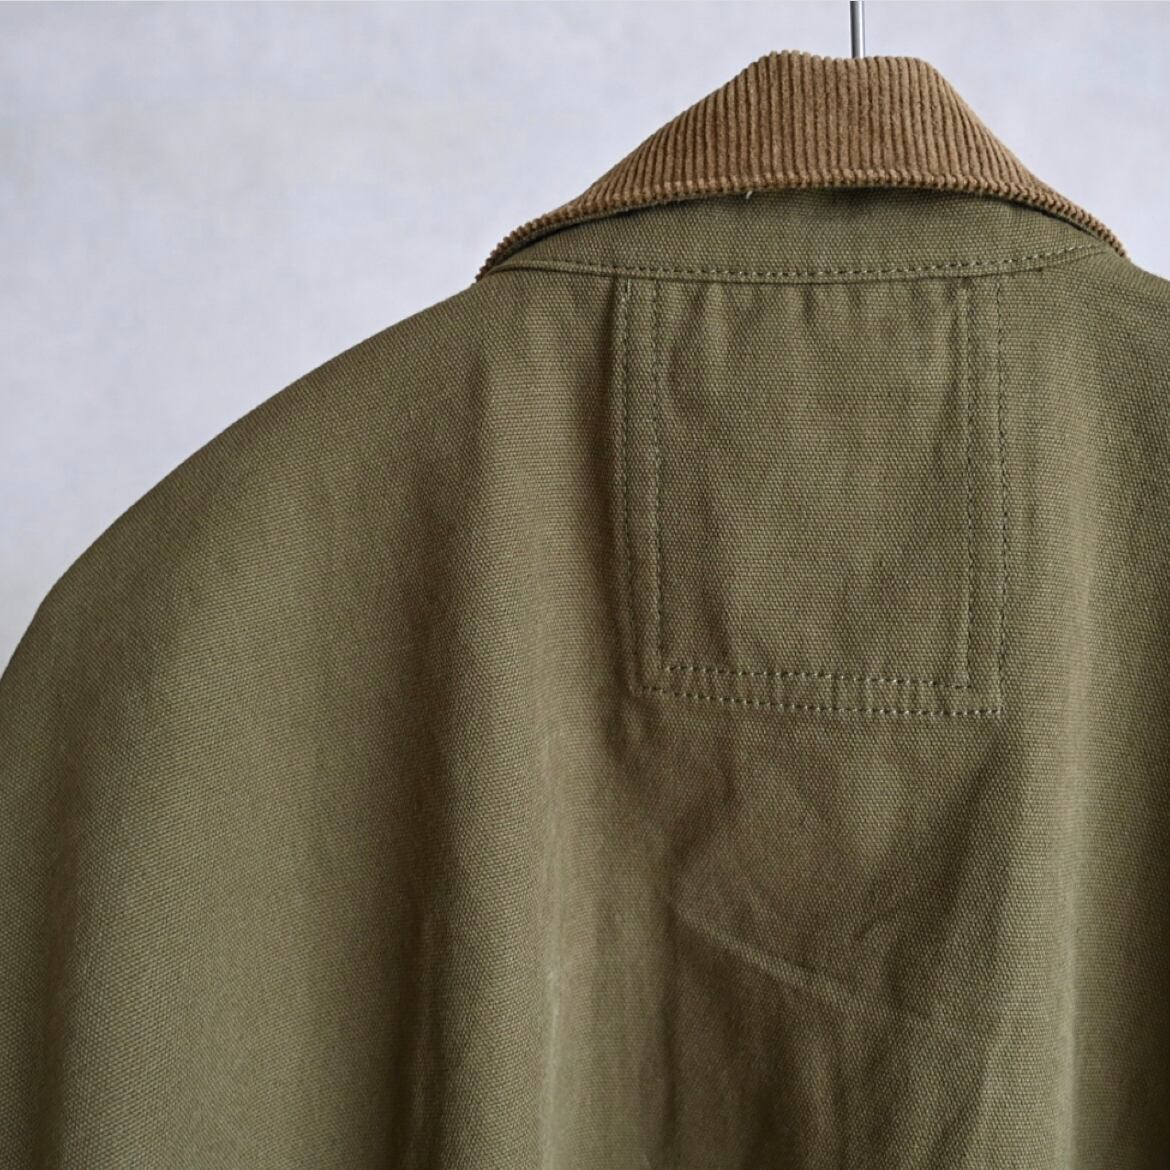 ARMY TWILL】COTTON DUCK LOGGER JACKET アーミーツイル コットン